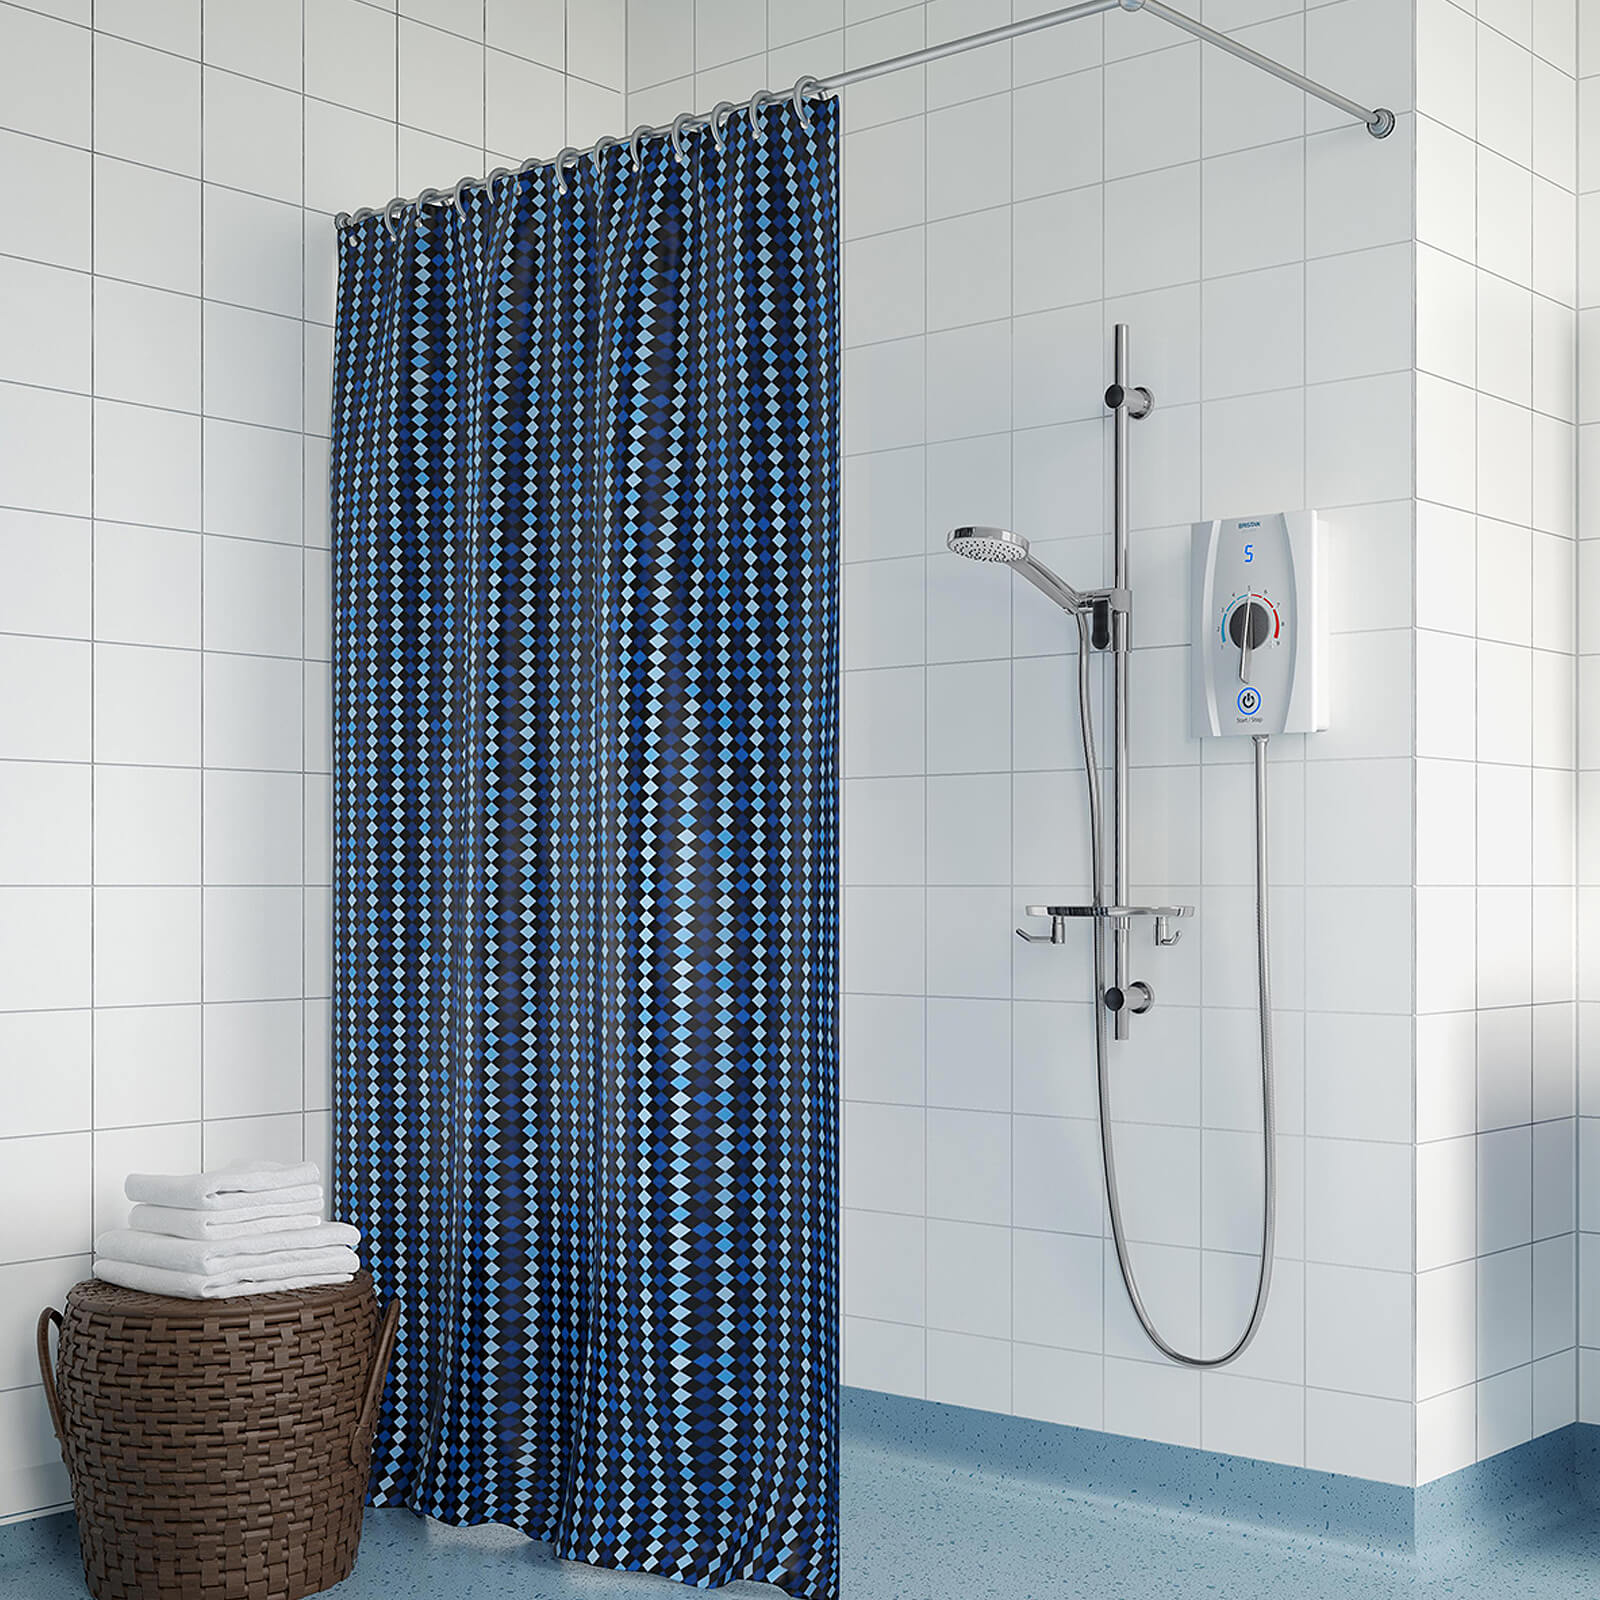 Bristan Joy Care Thermostatic White, Electric Shower Curtain